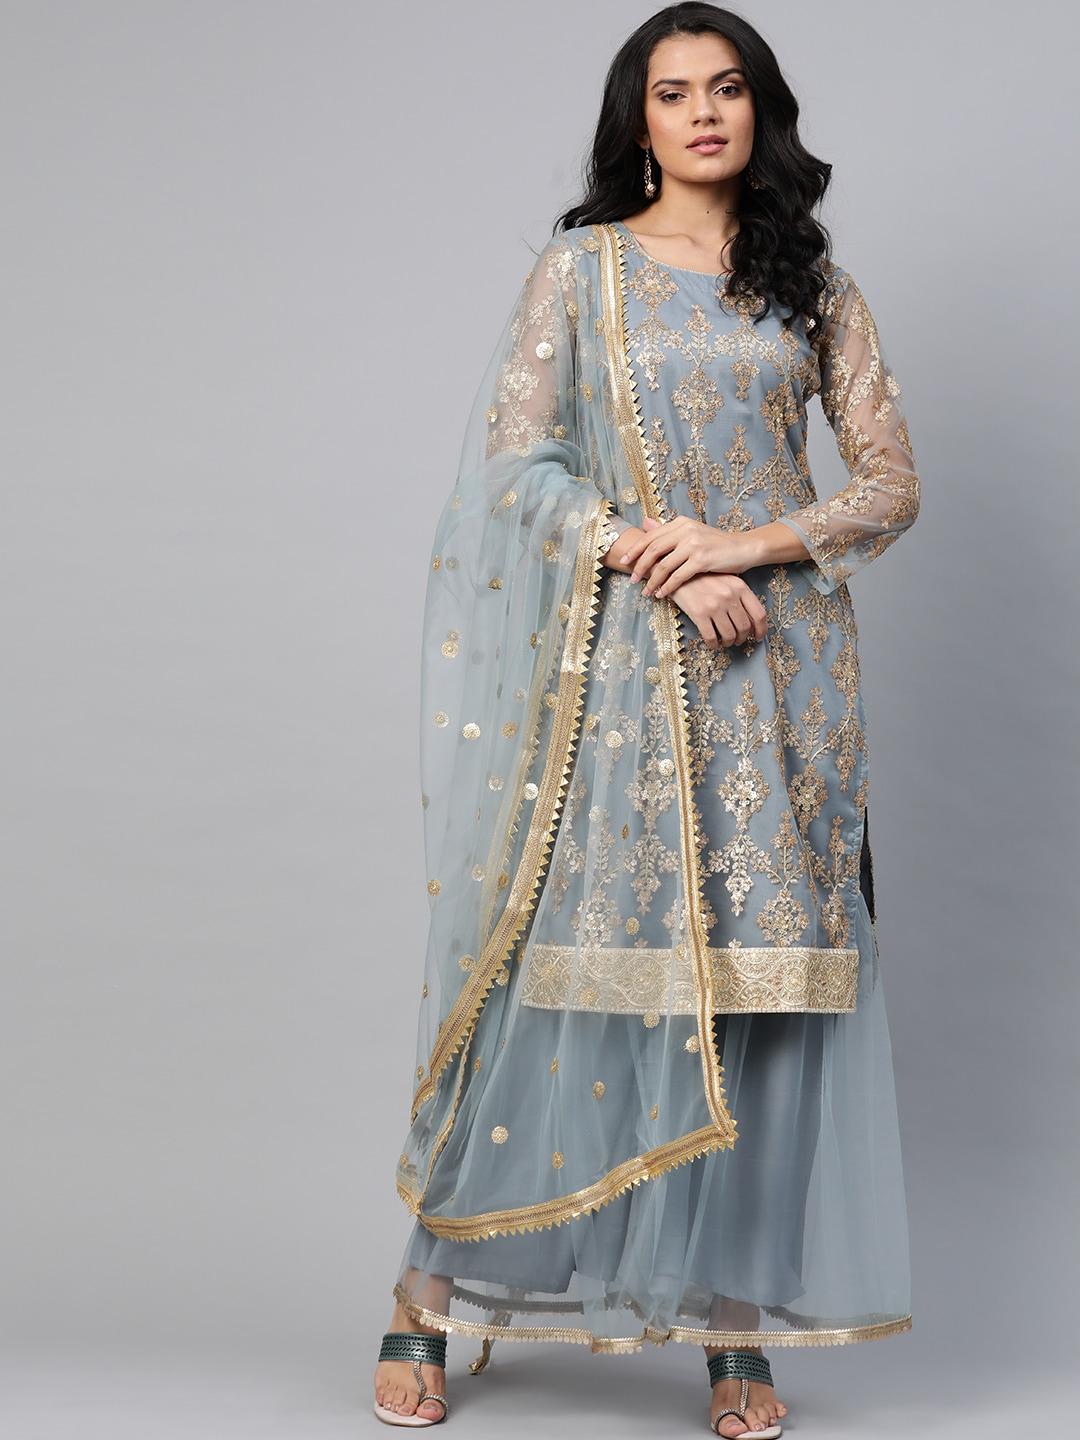 Readiprint Fashions Women Grey & Golden Embroidered Semi-Stitched Dress Material